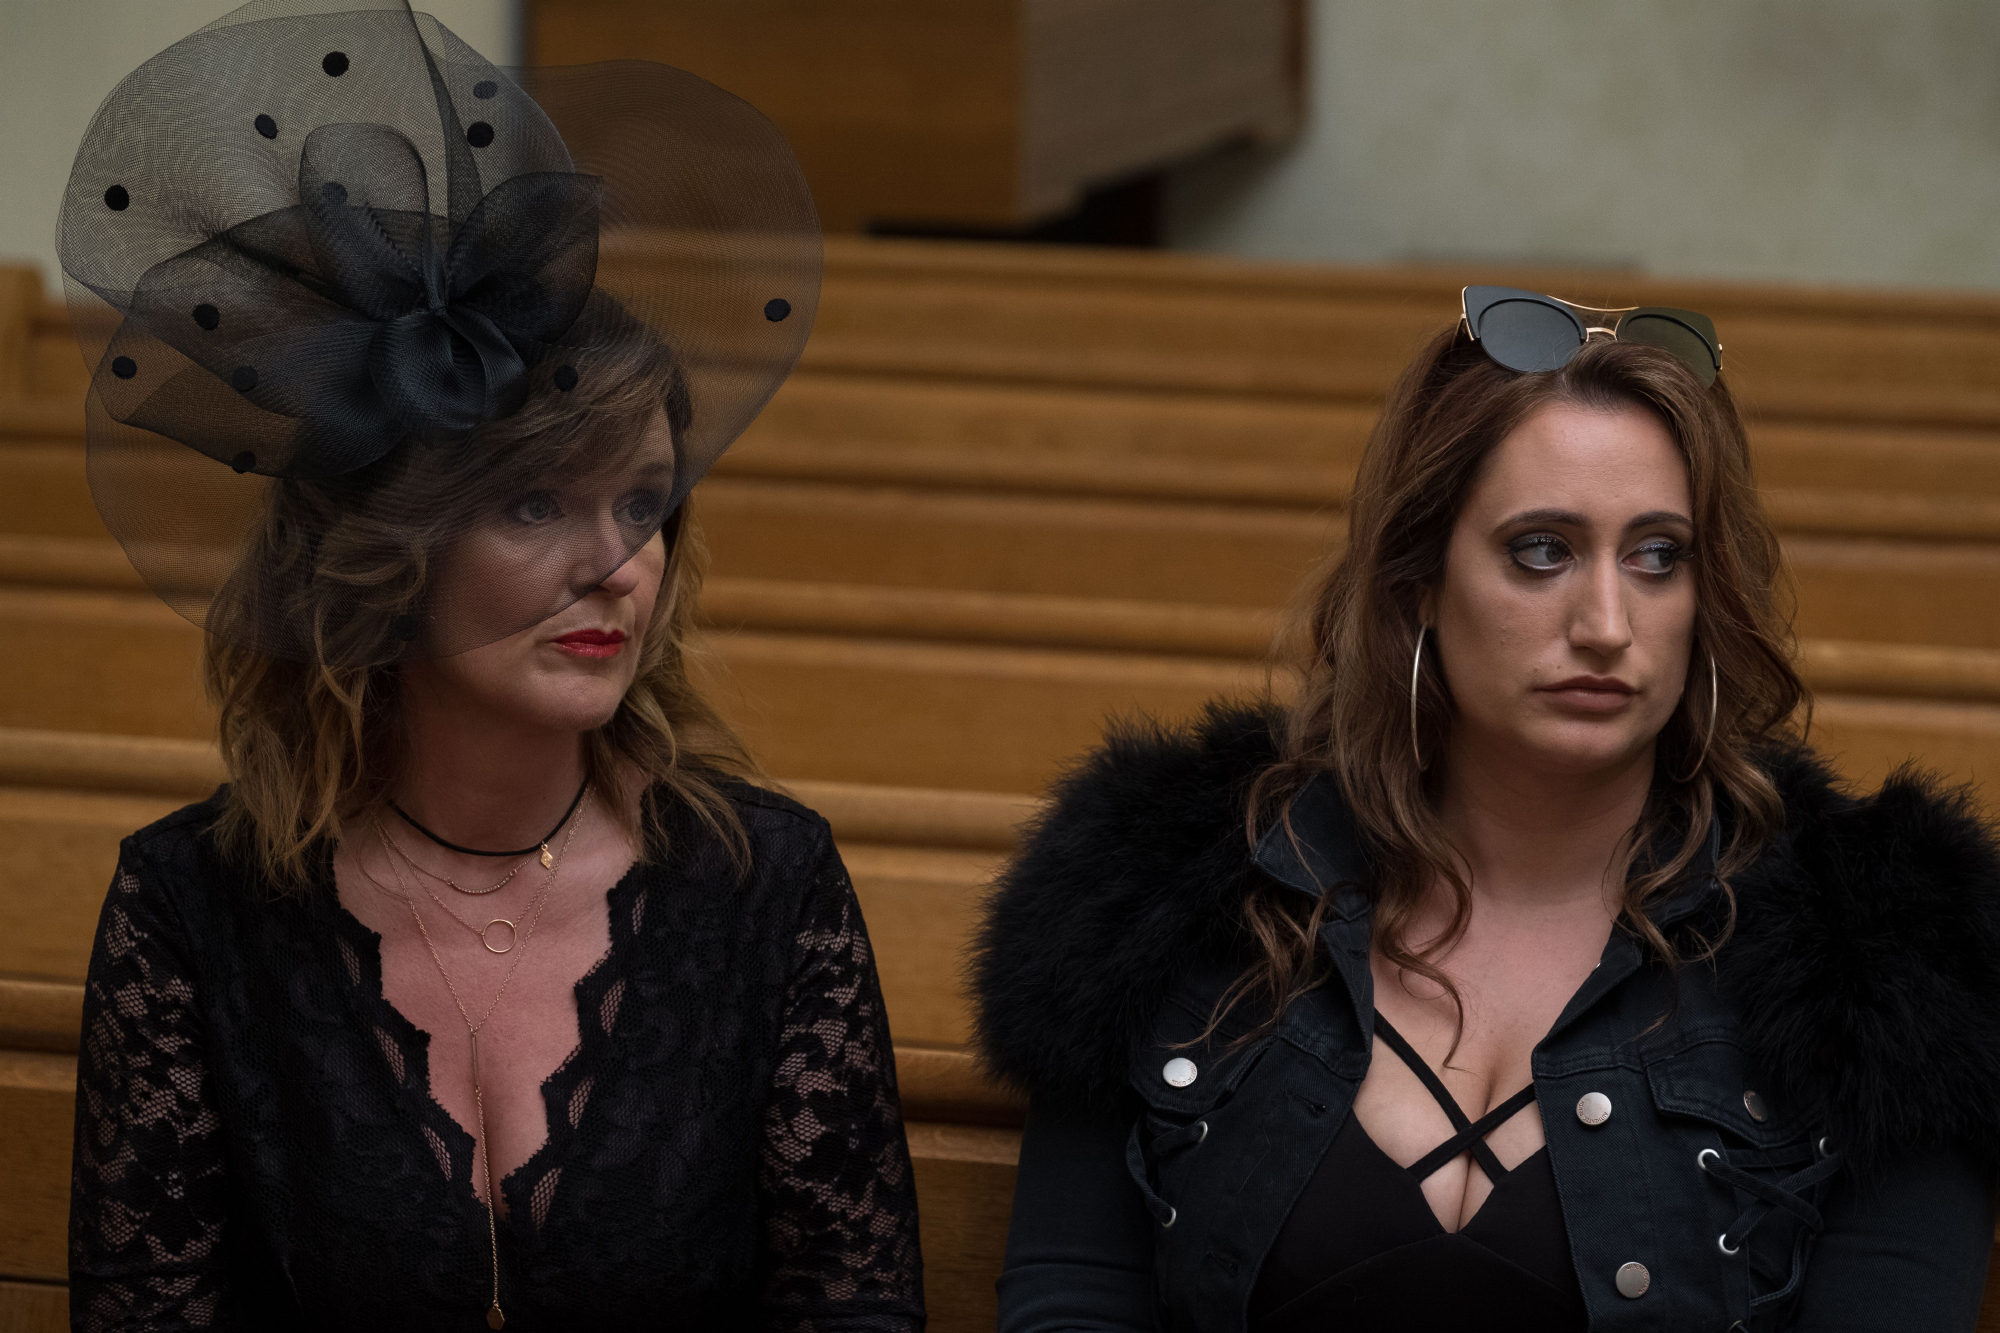 Exclusive Interview: 'Misfits' Star Lauren Socha Talks About Going From an Ensemble Cast to Taking the Lead in 'The Other One'